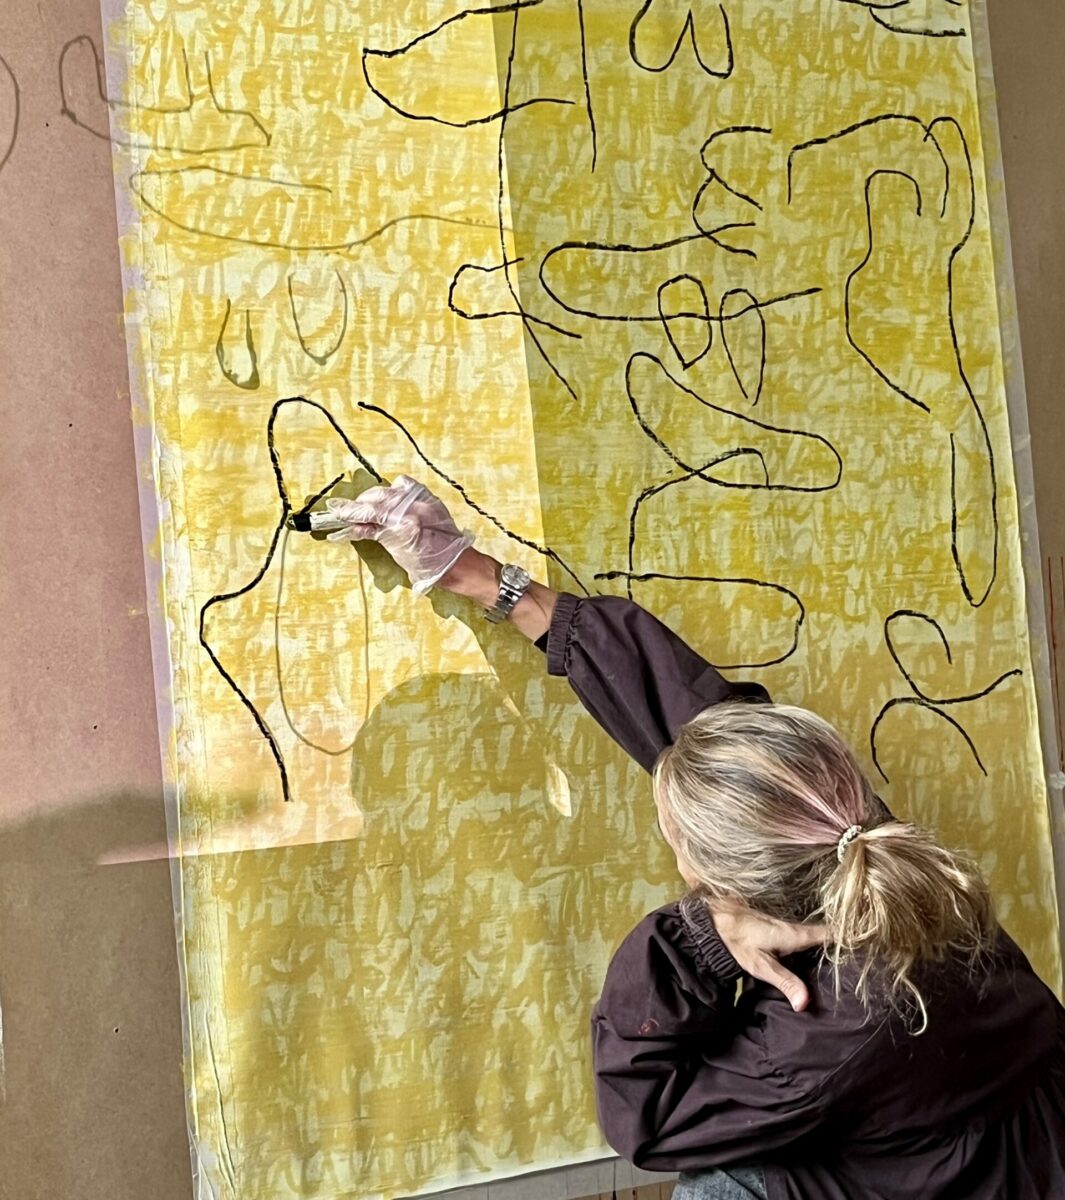 Closeup photograph of Florence drawing black lines on a yellow painted canvas taped to a board, using a black oil pastel crayon.